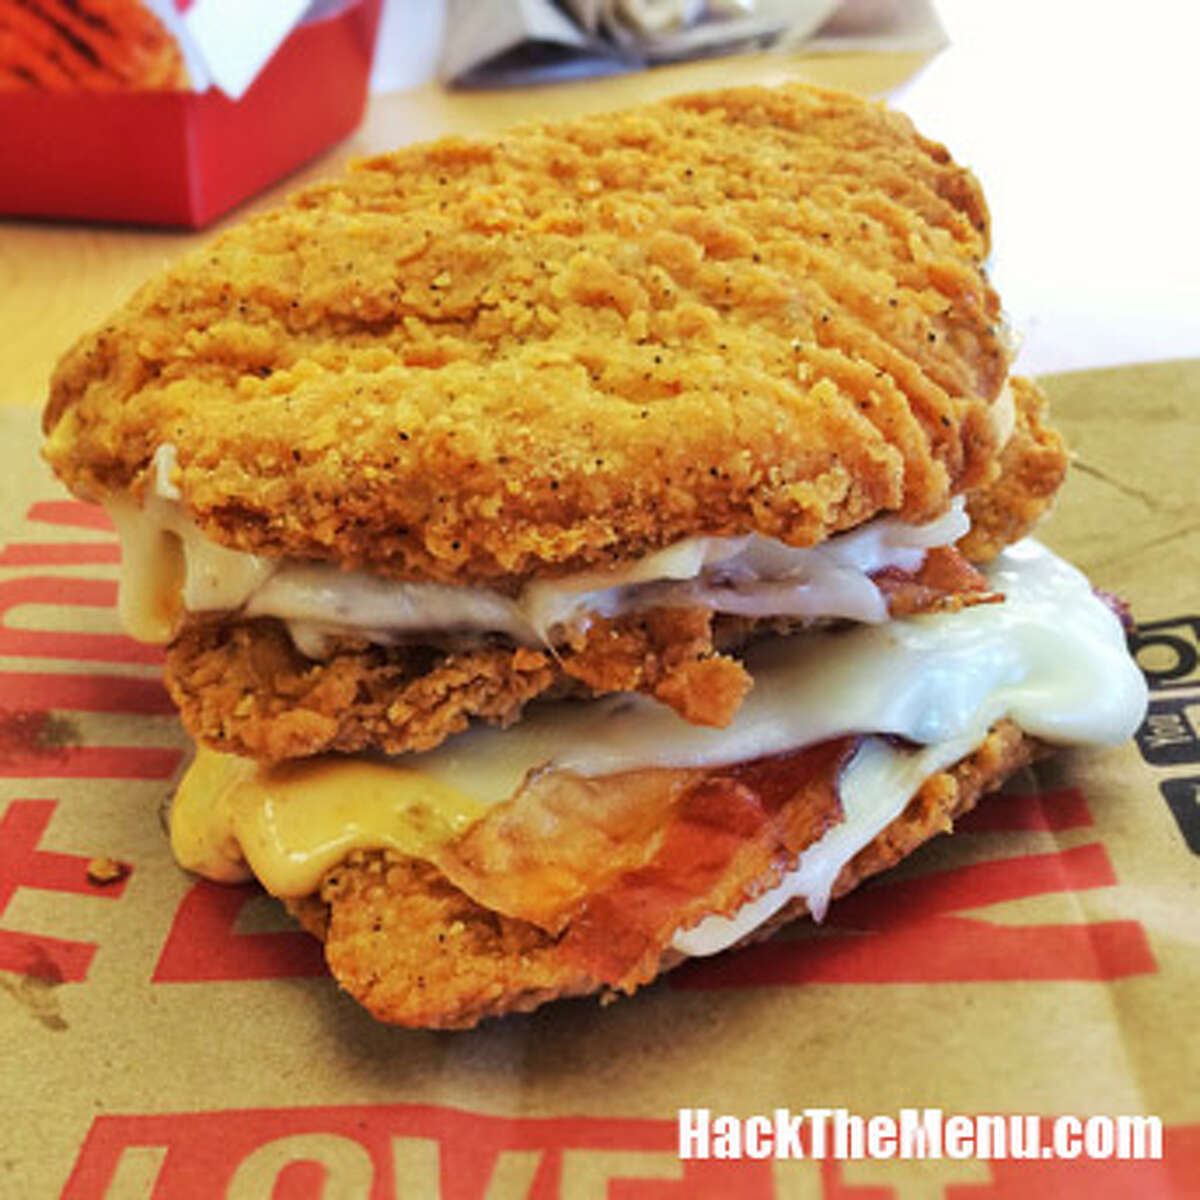 This is the KFC Triple Down, which replaces buns with more chicken!